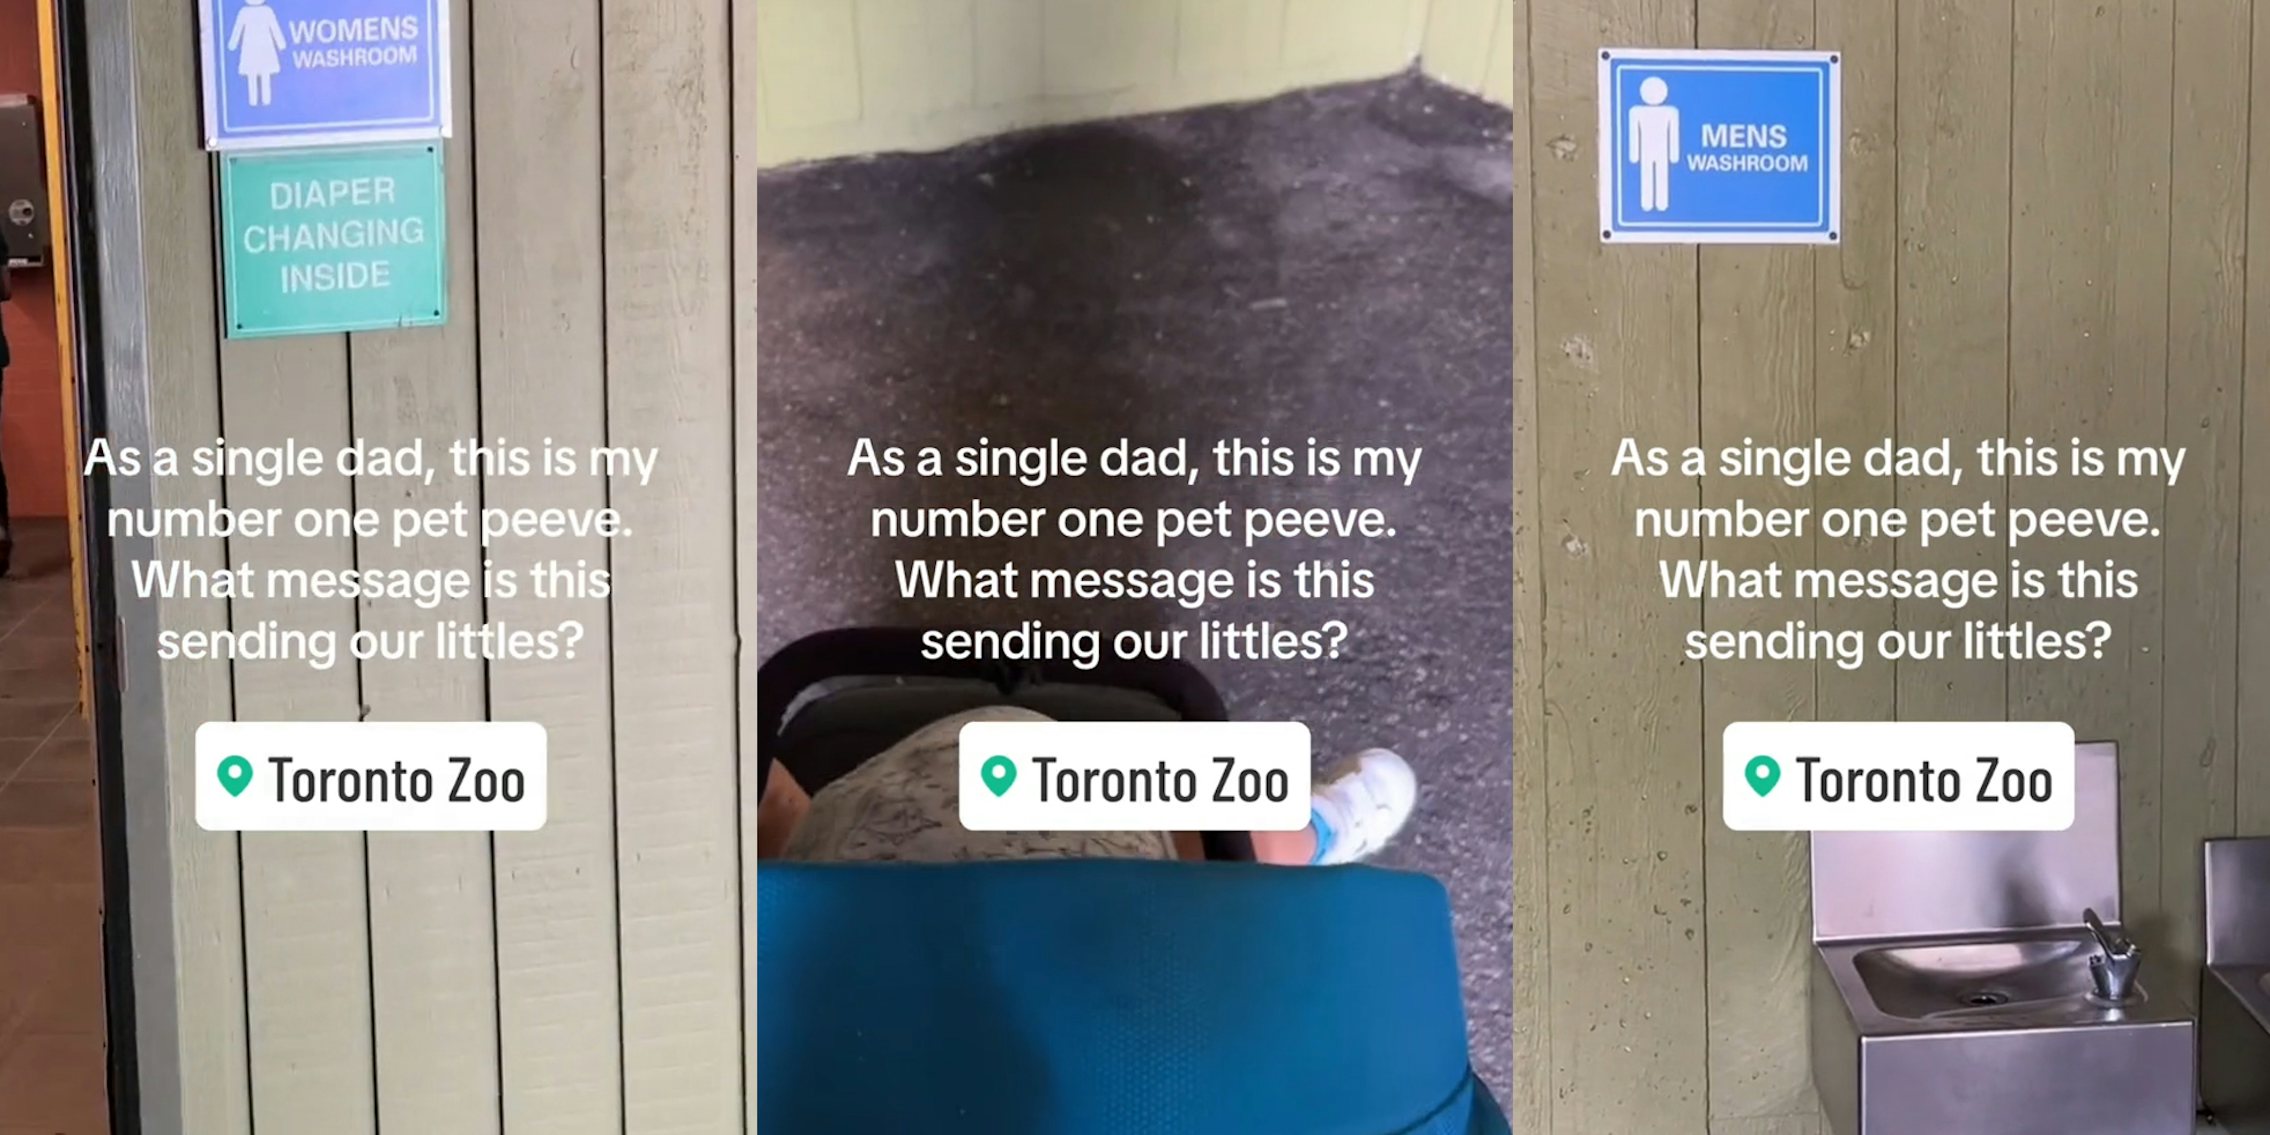 Toronto Zoo bathroom with signs 'WOMENS WASHROOM DIAPER CHANGING INSIDE' with caption 'As a single dad, this is my number one pet peeve. What message is this sending our littles?' (l) baby in stroller with caption 'As a single dad, this is my number one pet peeve. What message is this sending our littles?' (c) Toronto Zoo sign 'MENS BATHROOM' with caption 'As a single dad, this is my number one pet peeve. What message is this sending our littles?' (r)